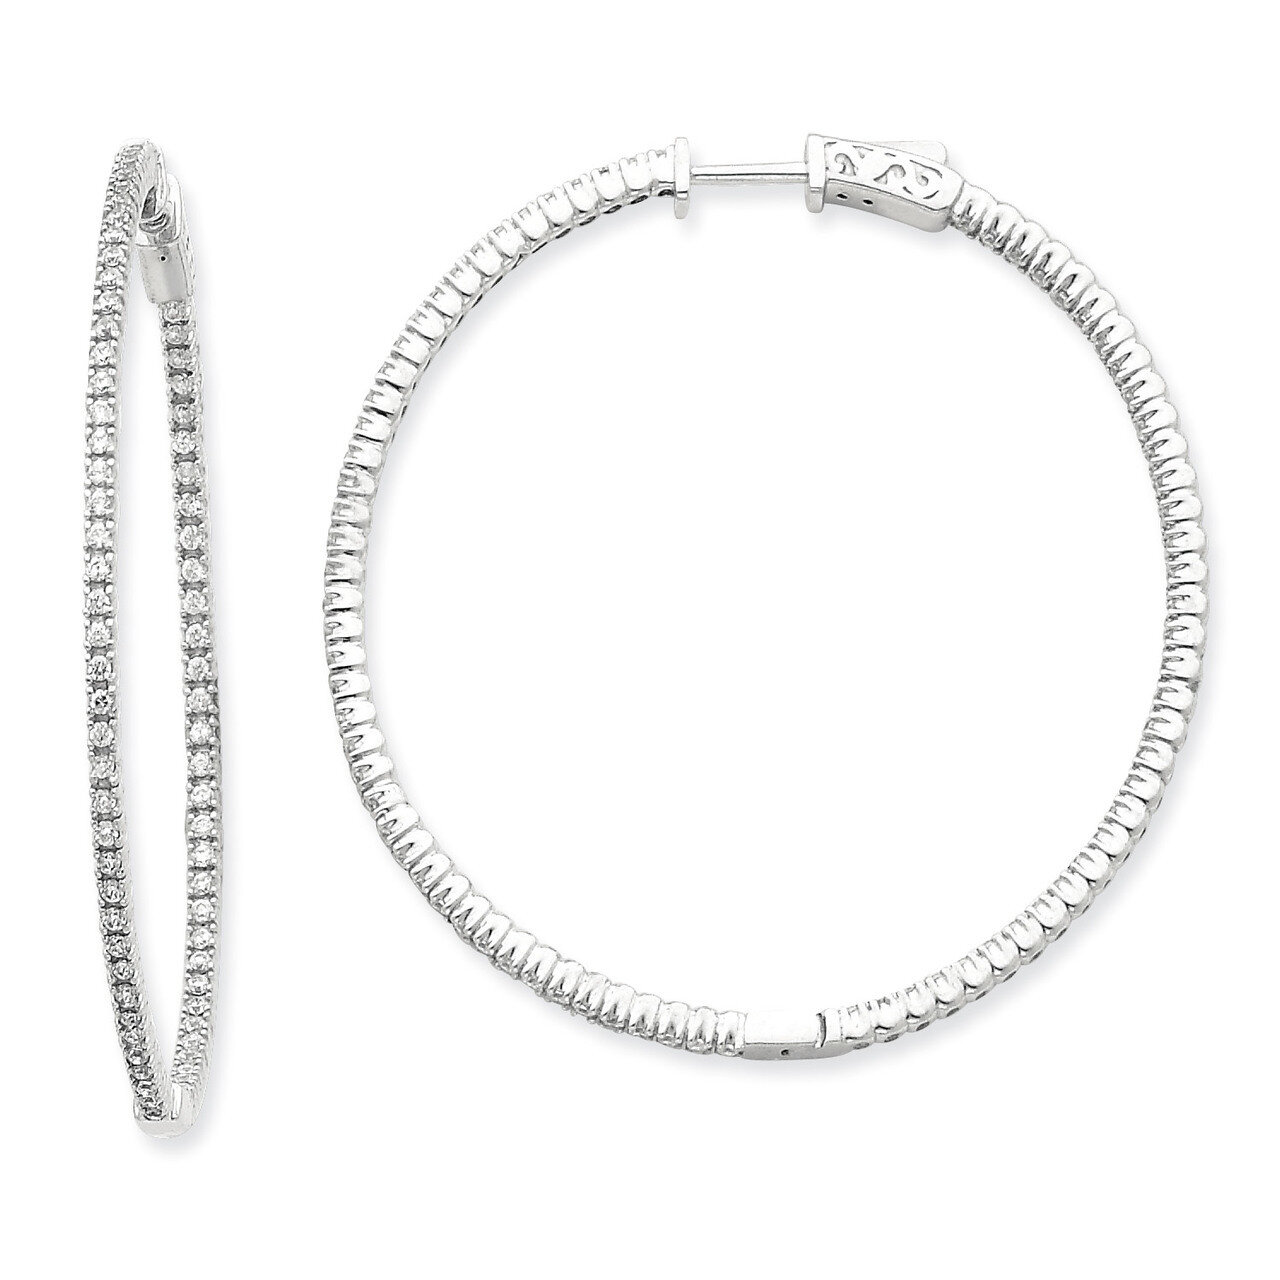 Diamond Round Hoop with Safety Clasp Earrings 14k White Gold XE1986WAA